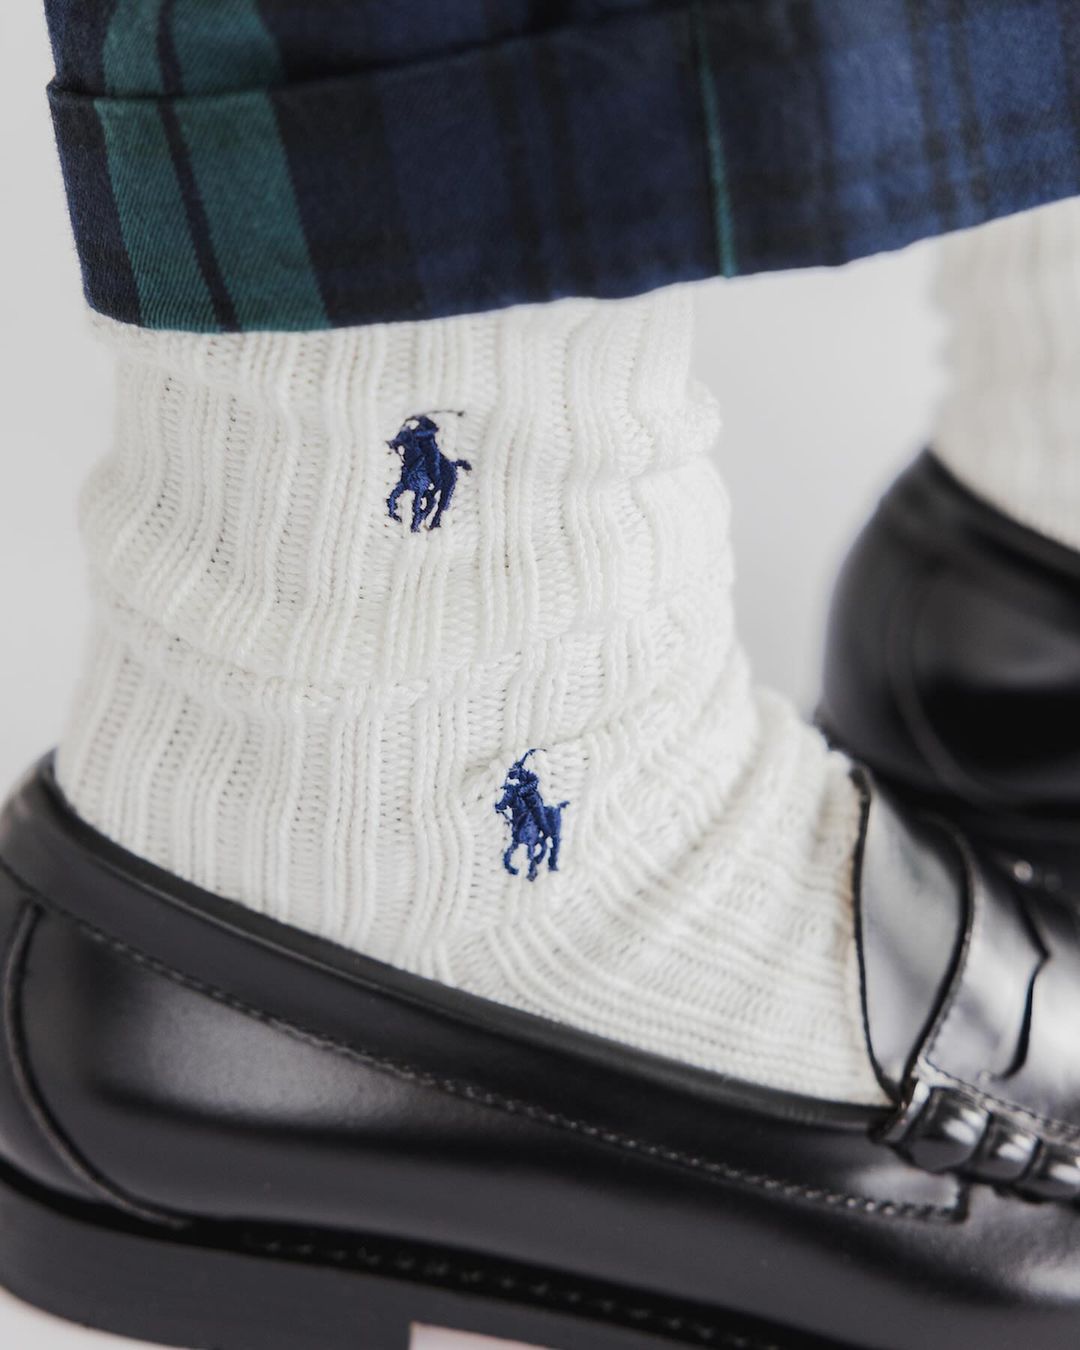 Beams polo ralph lauren collection collaboration automne hiver 2023 aw23 chaussettes logo pony